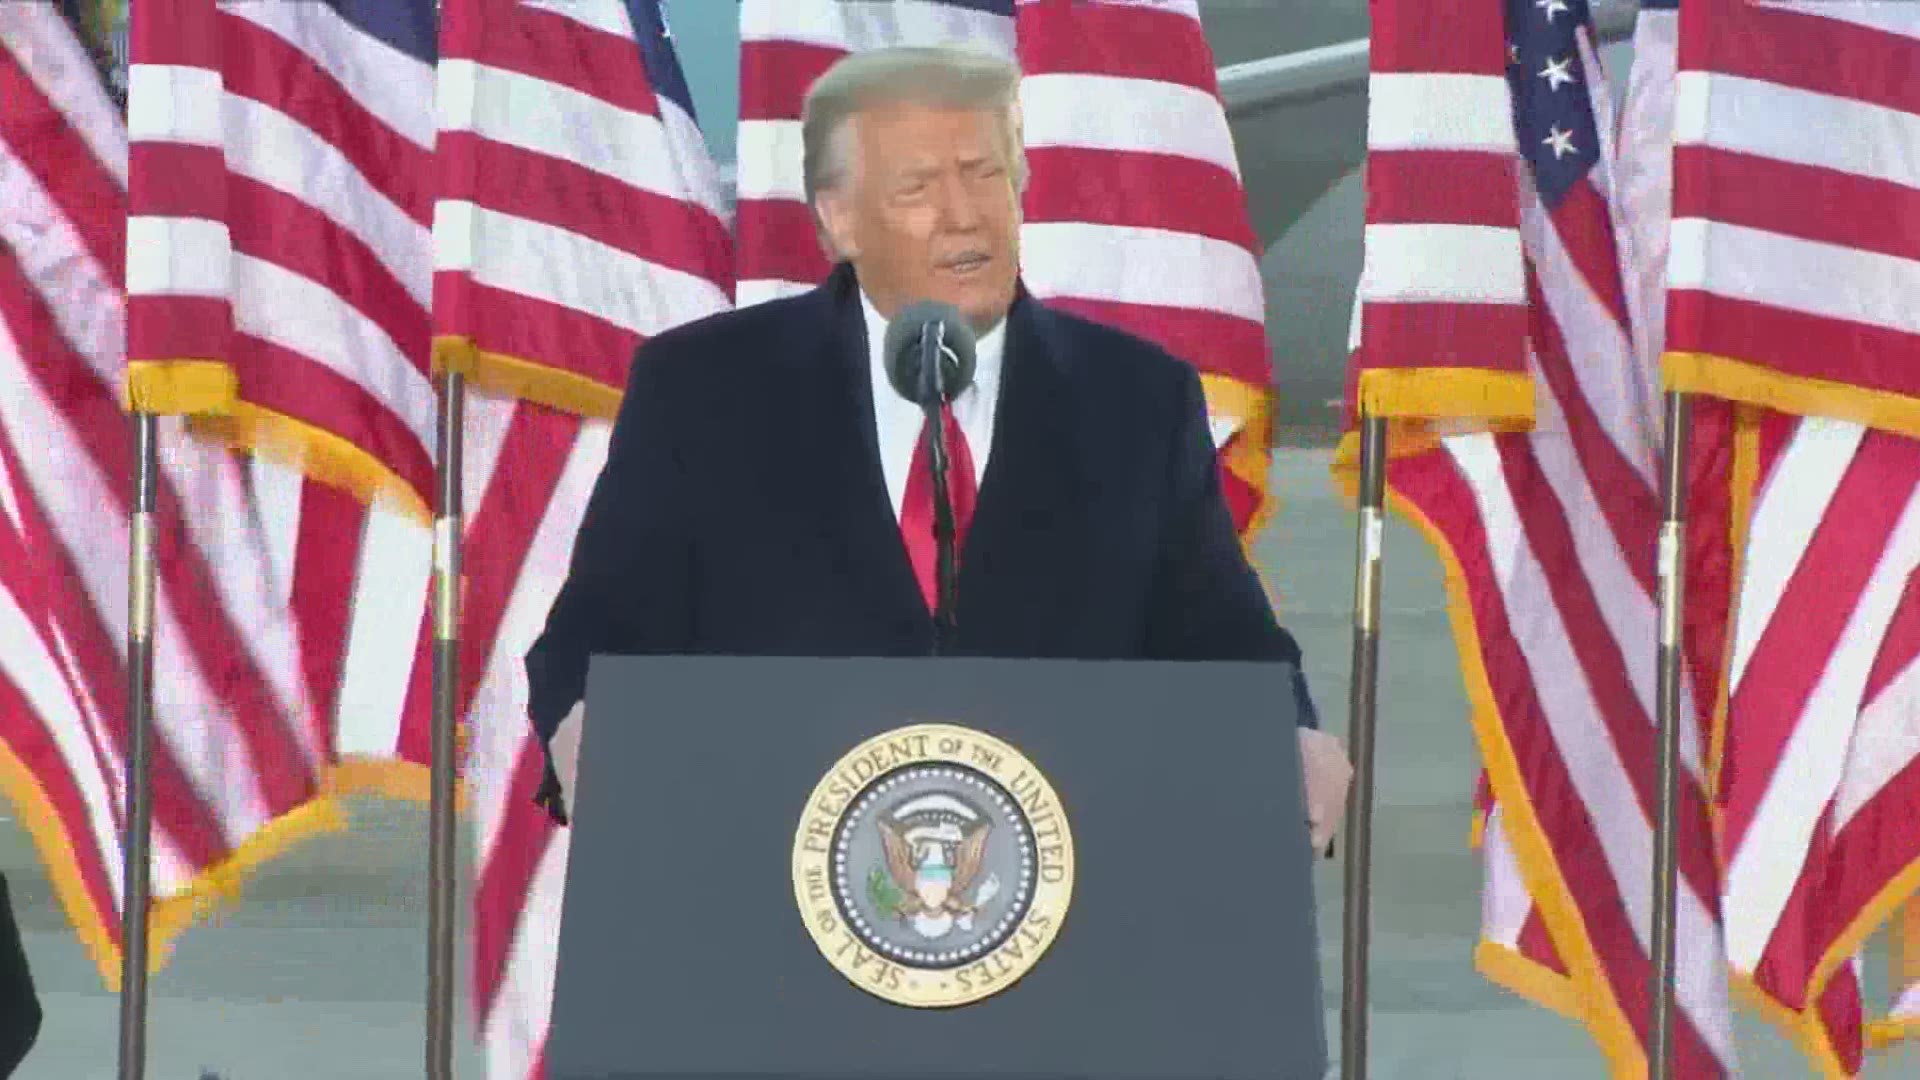 Hours before his presidency ends, President Donald Trump spoke to a small crowd of supporters at Joint Base Andrews before leaving the nation's capital.